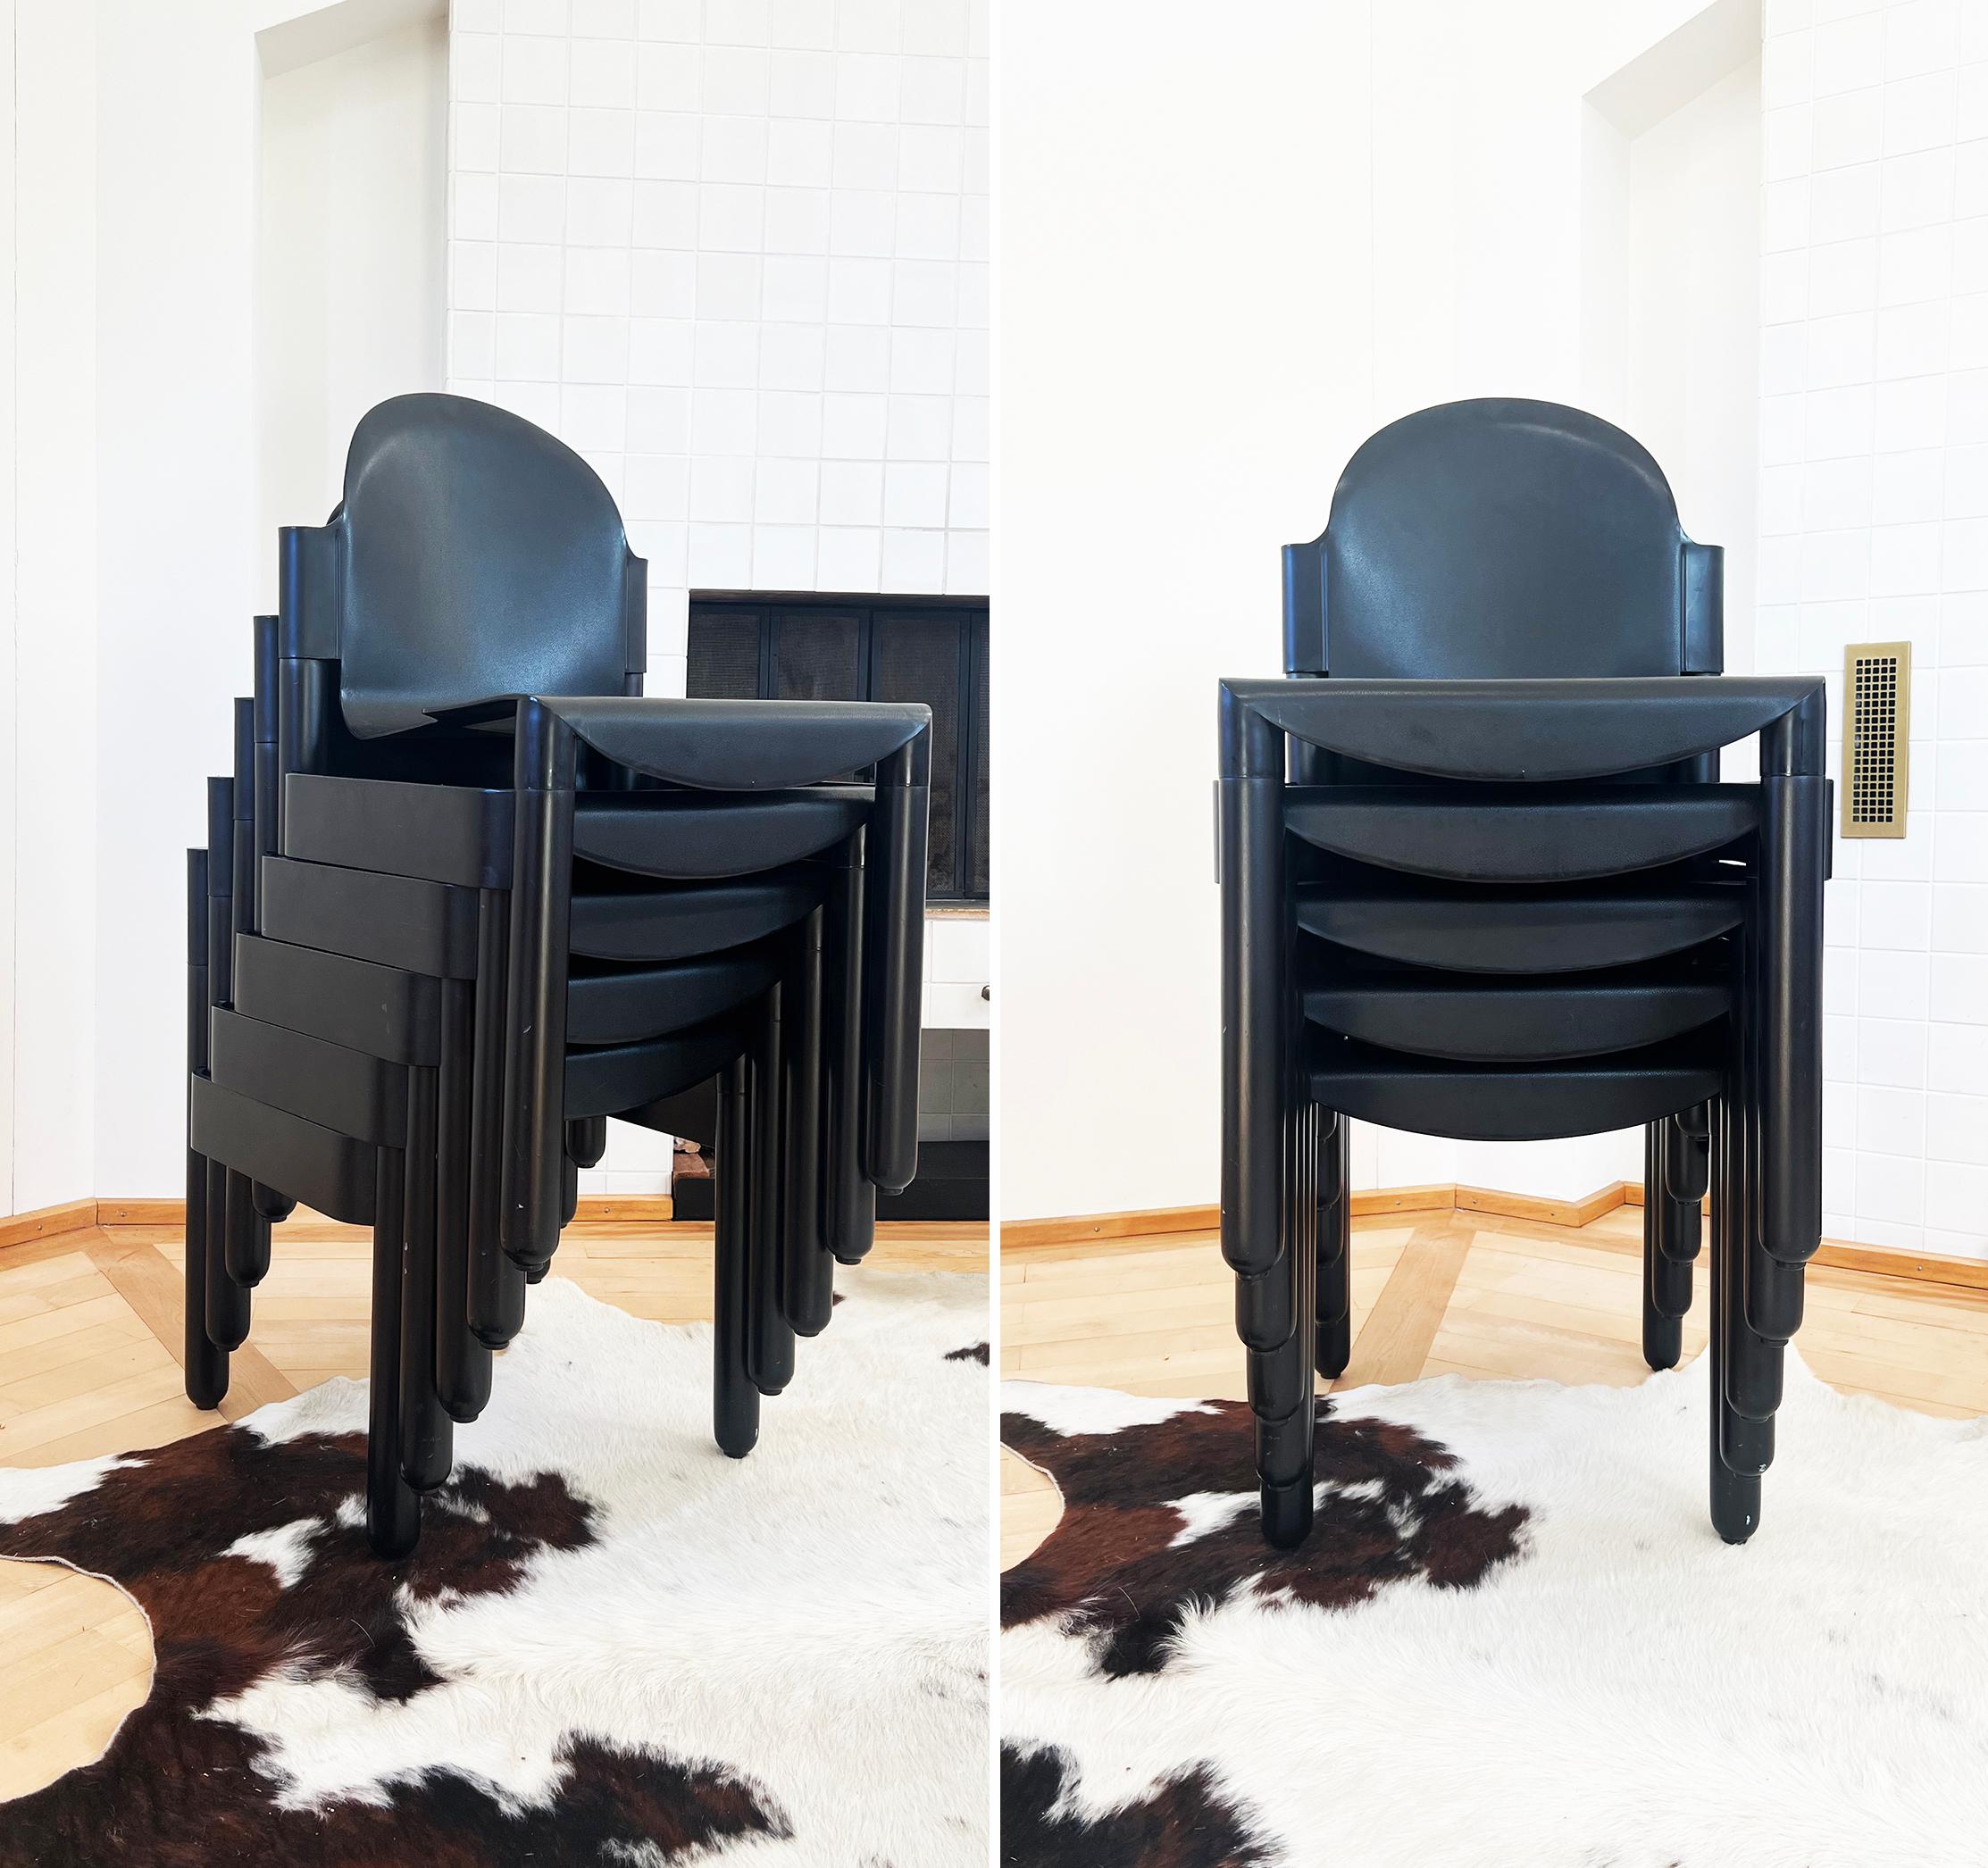 Excellent set of 6 Flex 2000 Stacking Chairs by Gerd Lange for Thonet, with Solid Black wooden frames and black seats. No longer produced, Rare items. VERY hard to find in solid black. Very Chic!

Designed by Gerd Lange in 1983, manufactured in